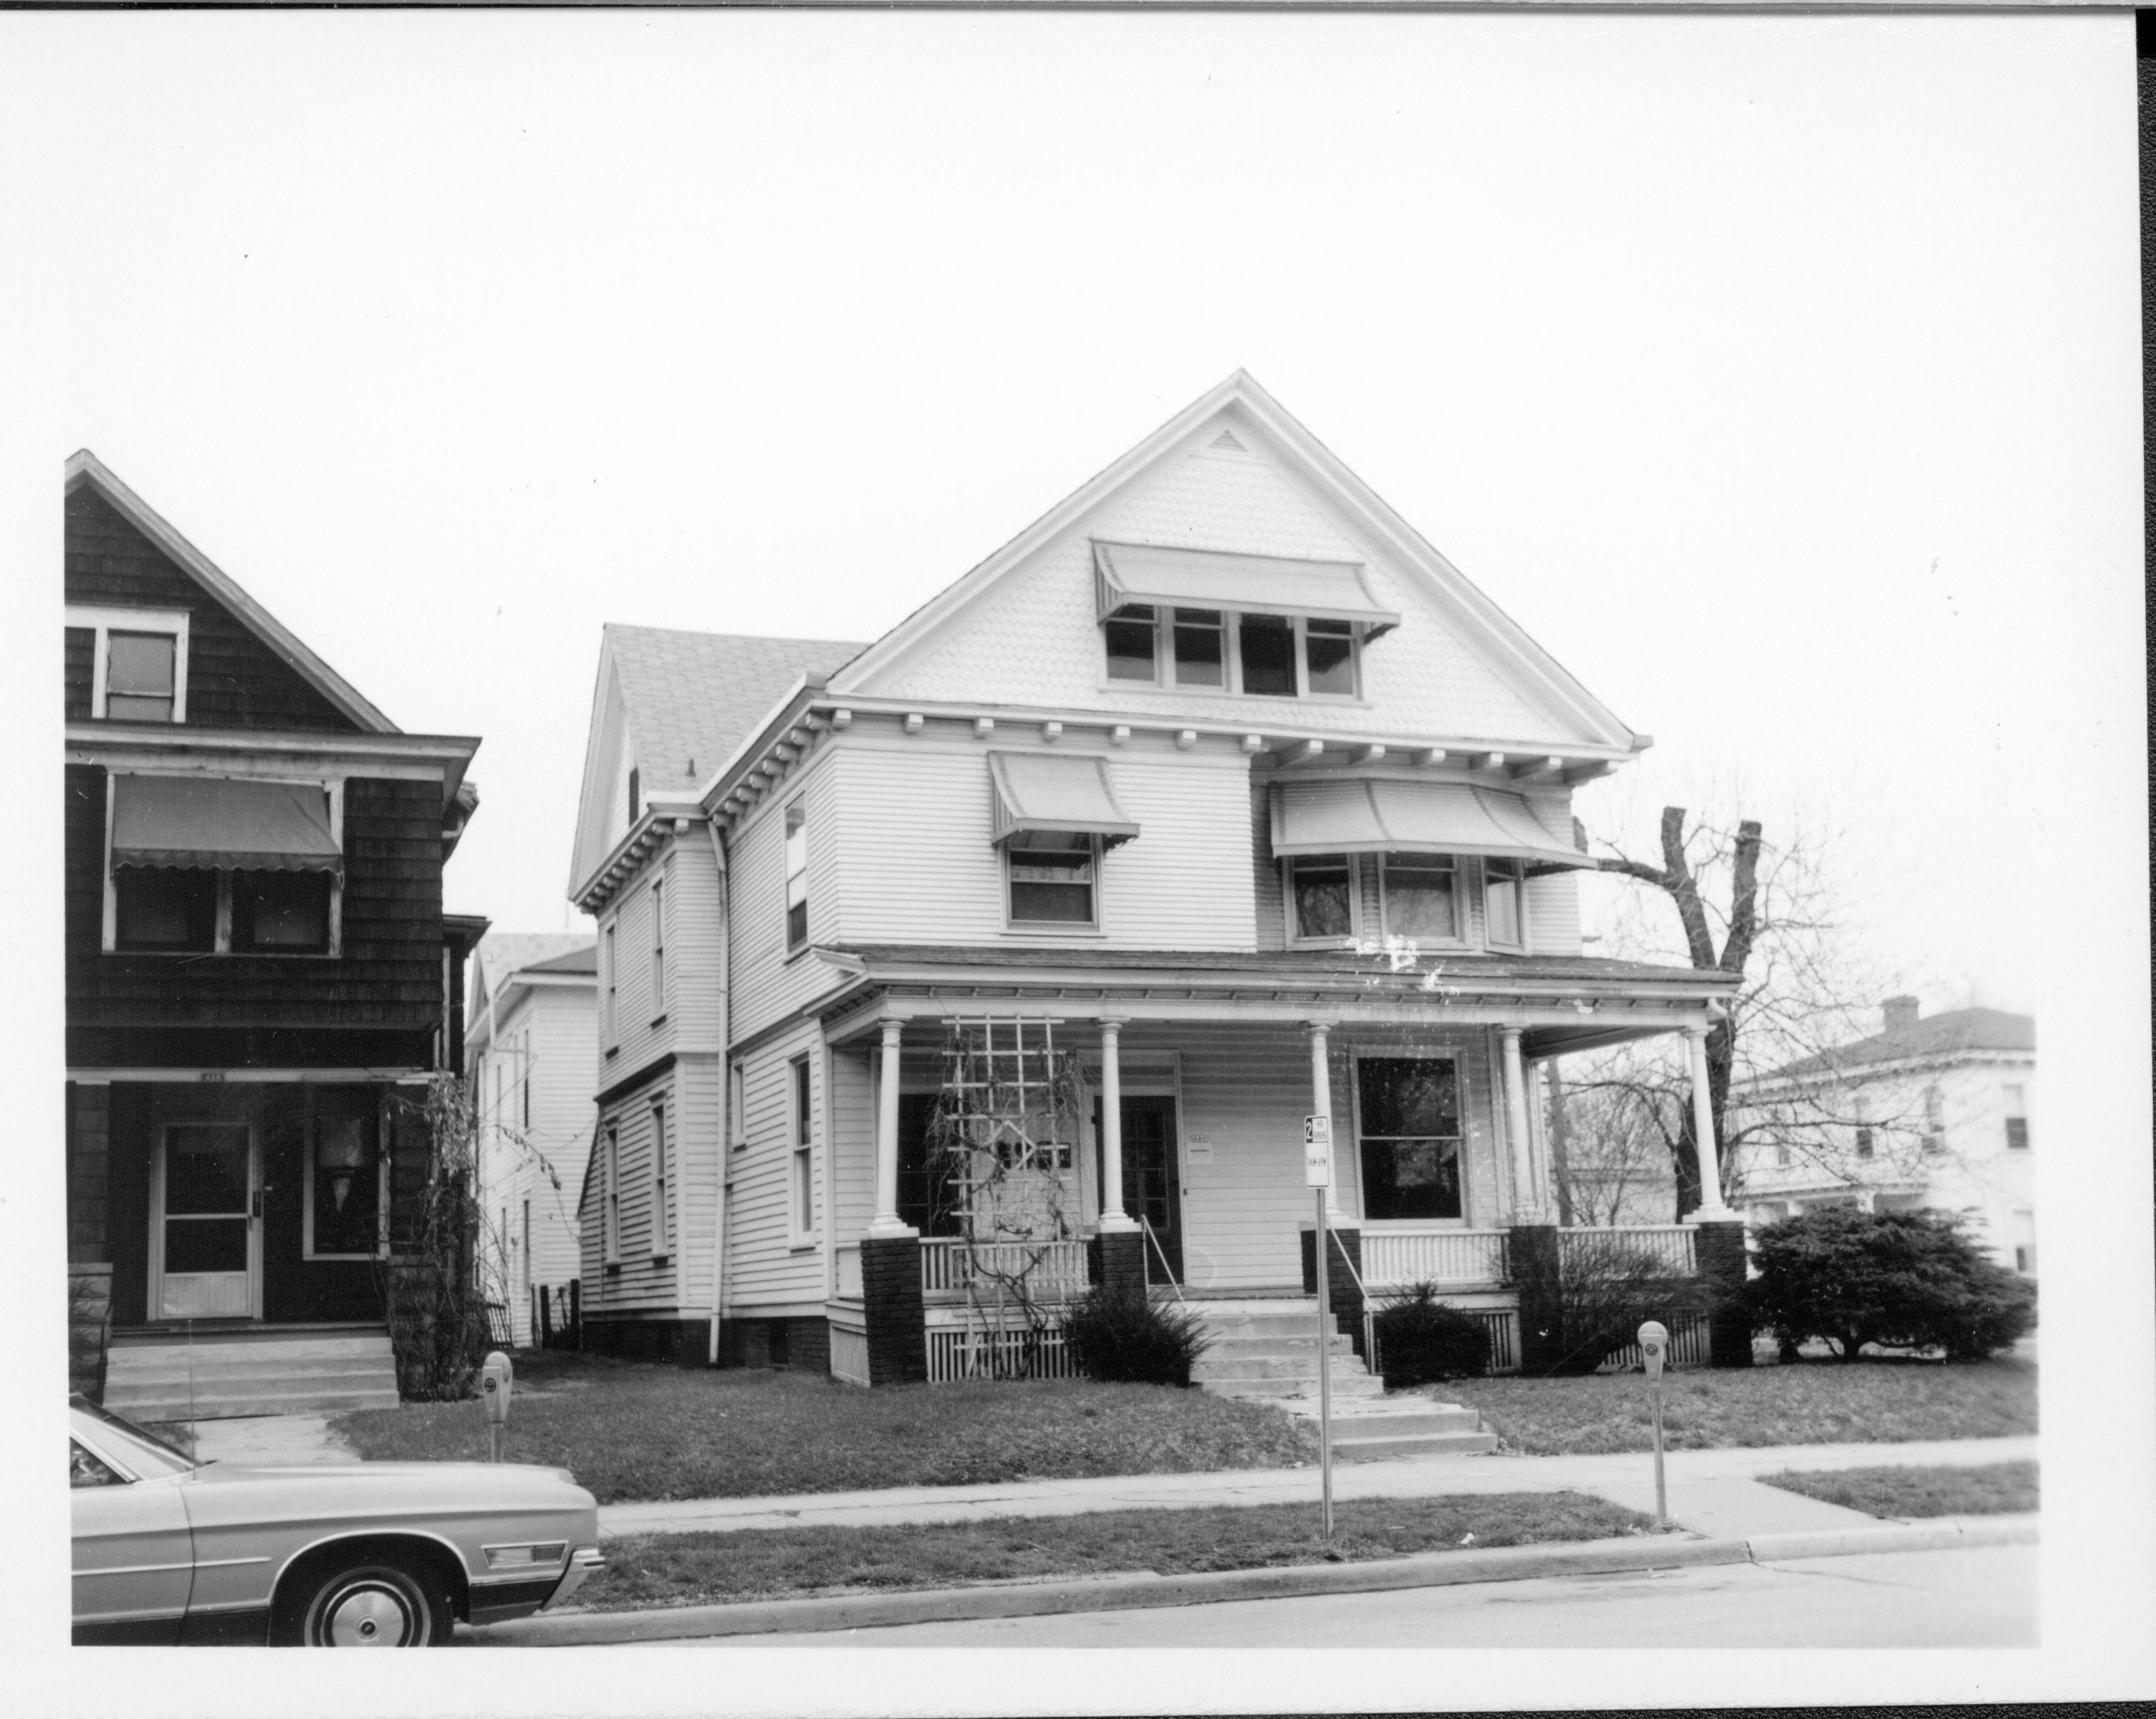 Home owned by William Hermes in use as apartments, Block 7, Lot 8 along 7th Street.  Now the location of the Visitor Center.  Home owned by Eleanor Pruett on left, home owned by Hugh Garvey in right background Looking East/Southeast along 7th Street Hermes, Pruett, Visitor Center, 7th Street, Garvey